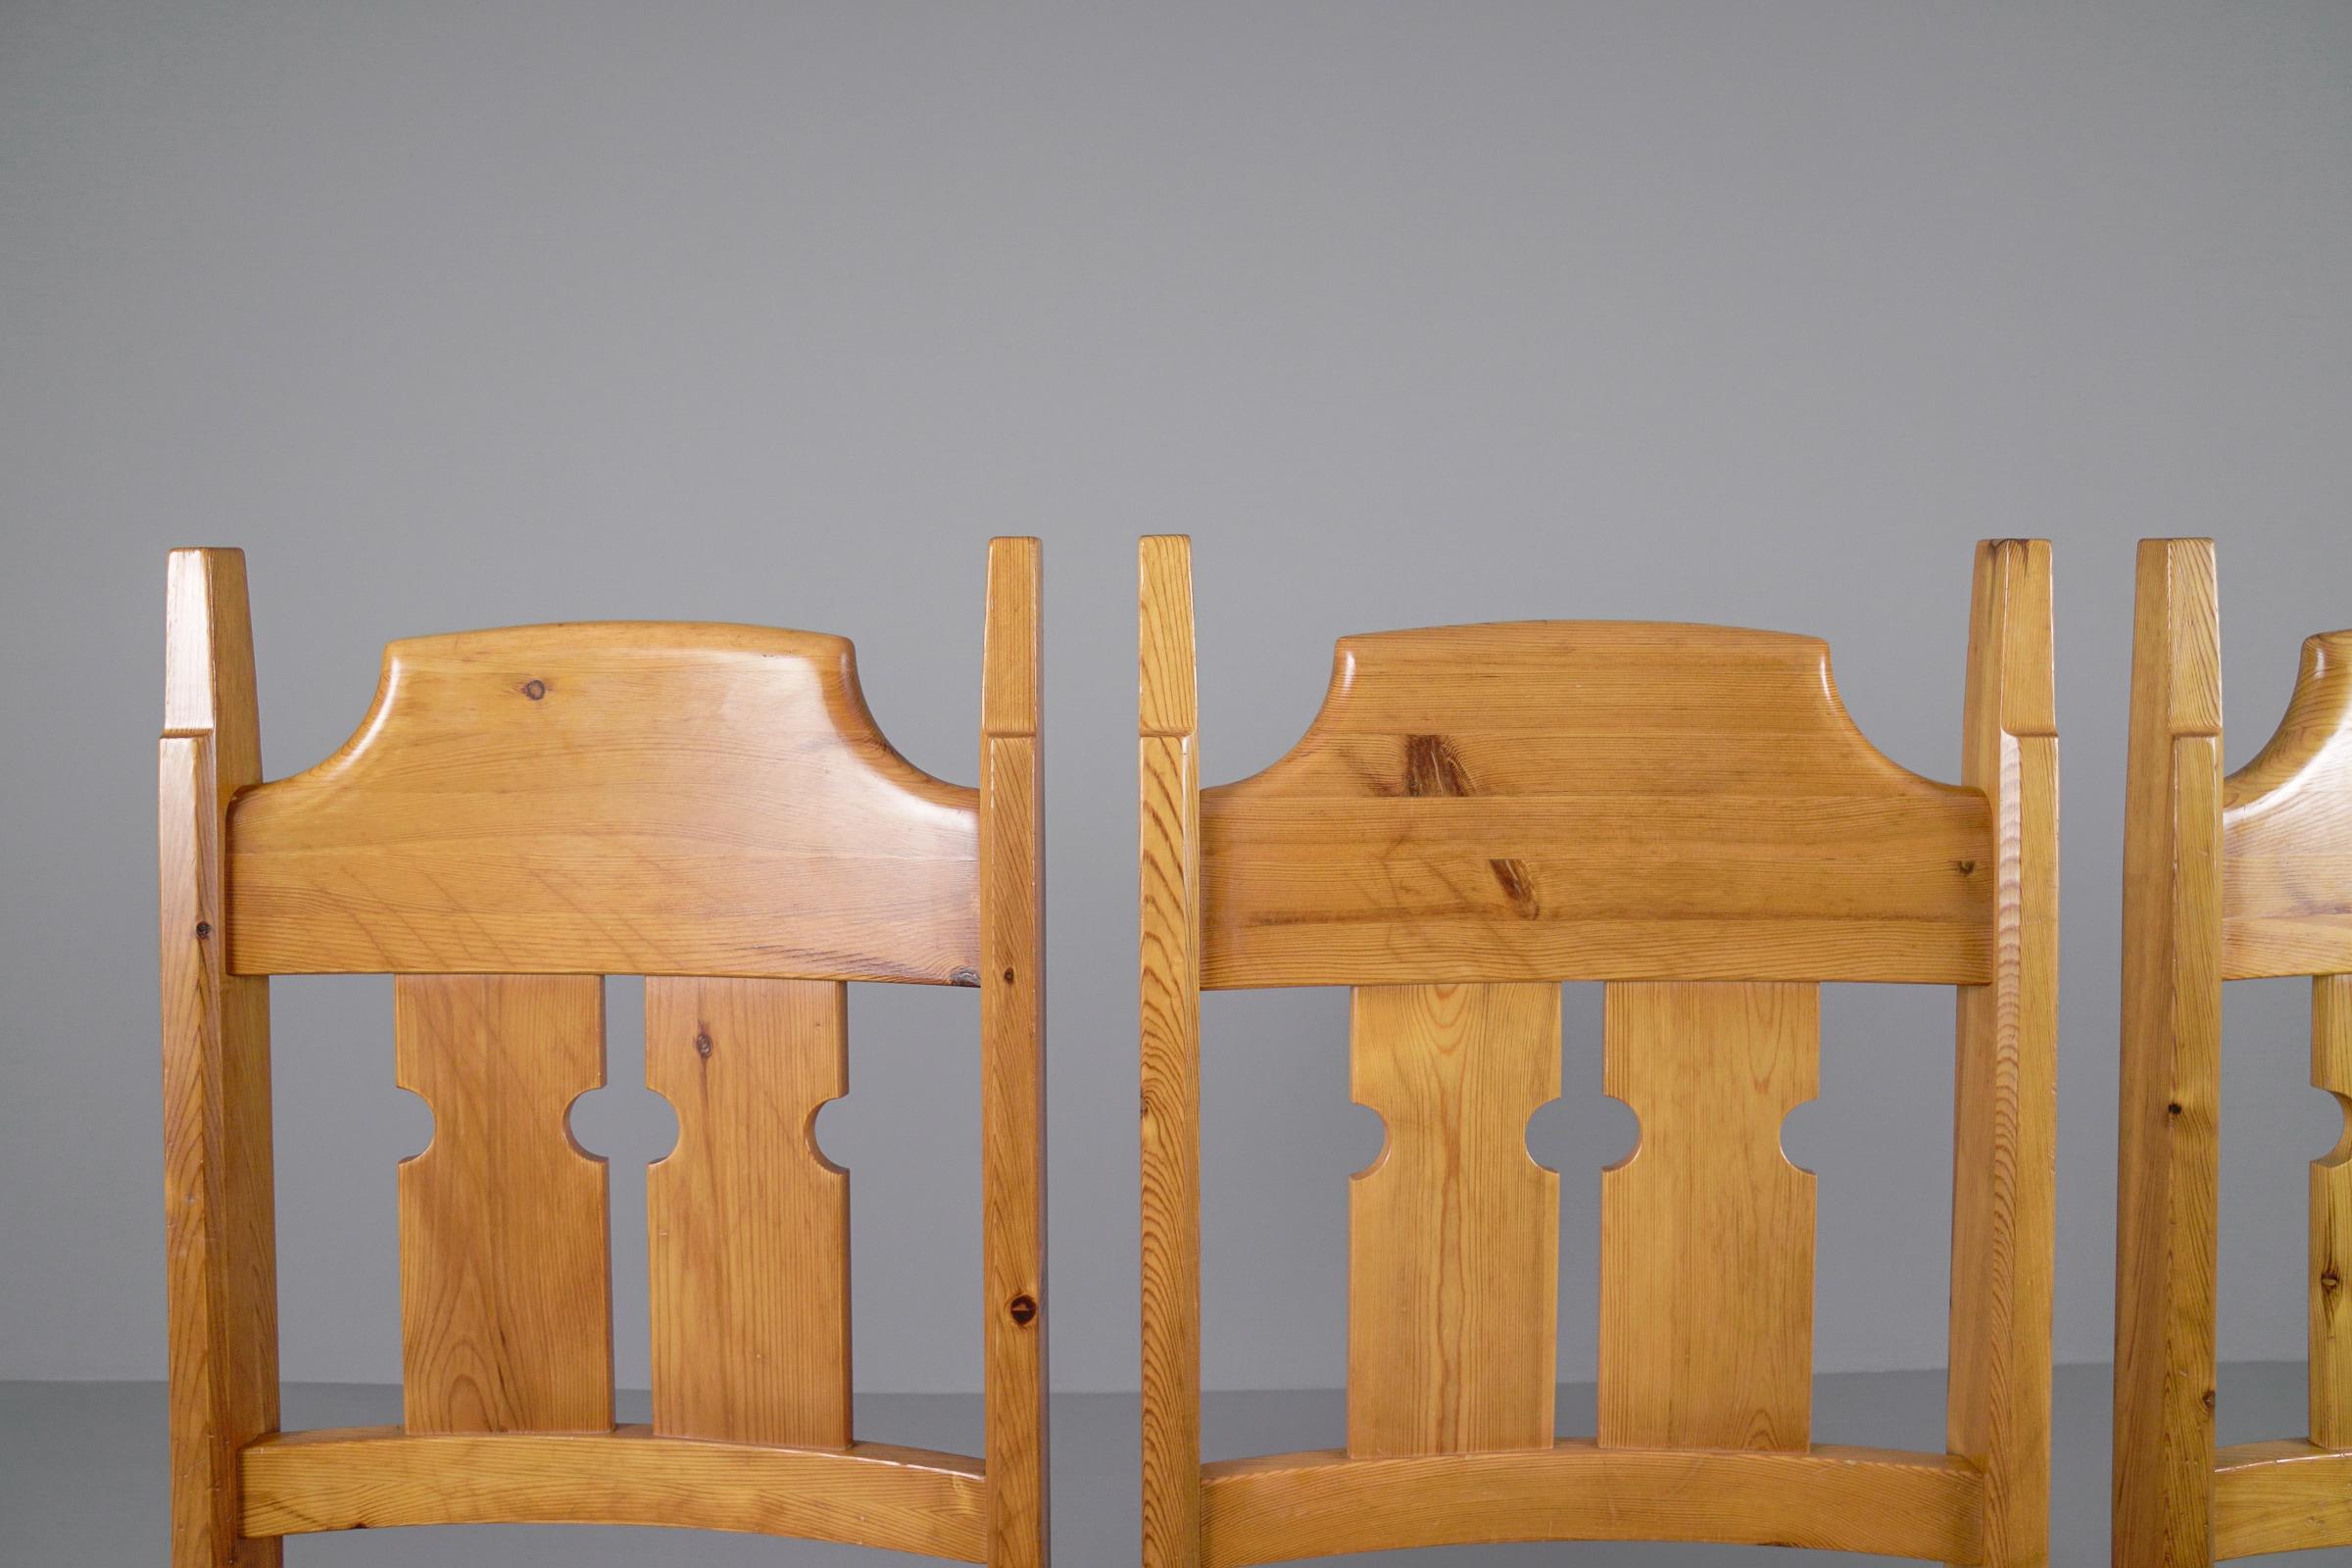  Set of 4 Swedish Pine Chairs by Gilbert Marklund for Furusnickarn AB, 1970s For Sale 2